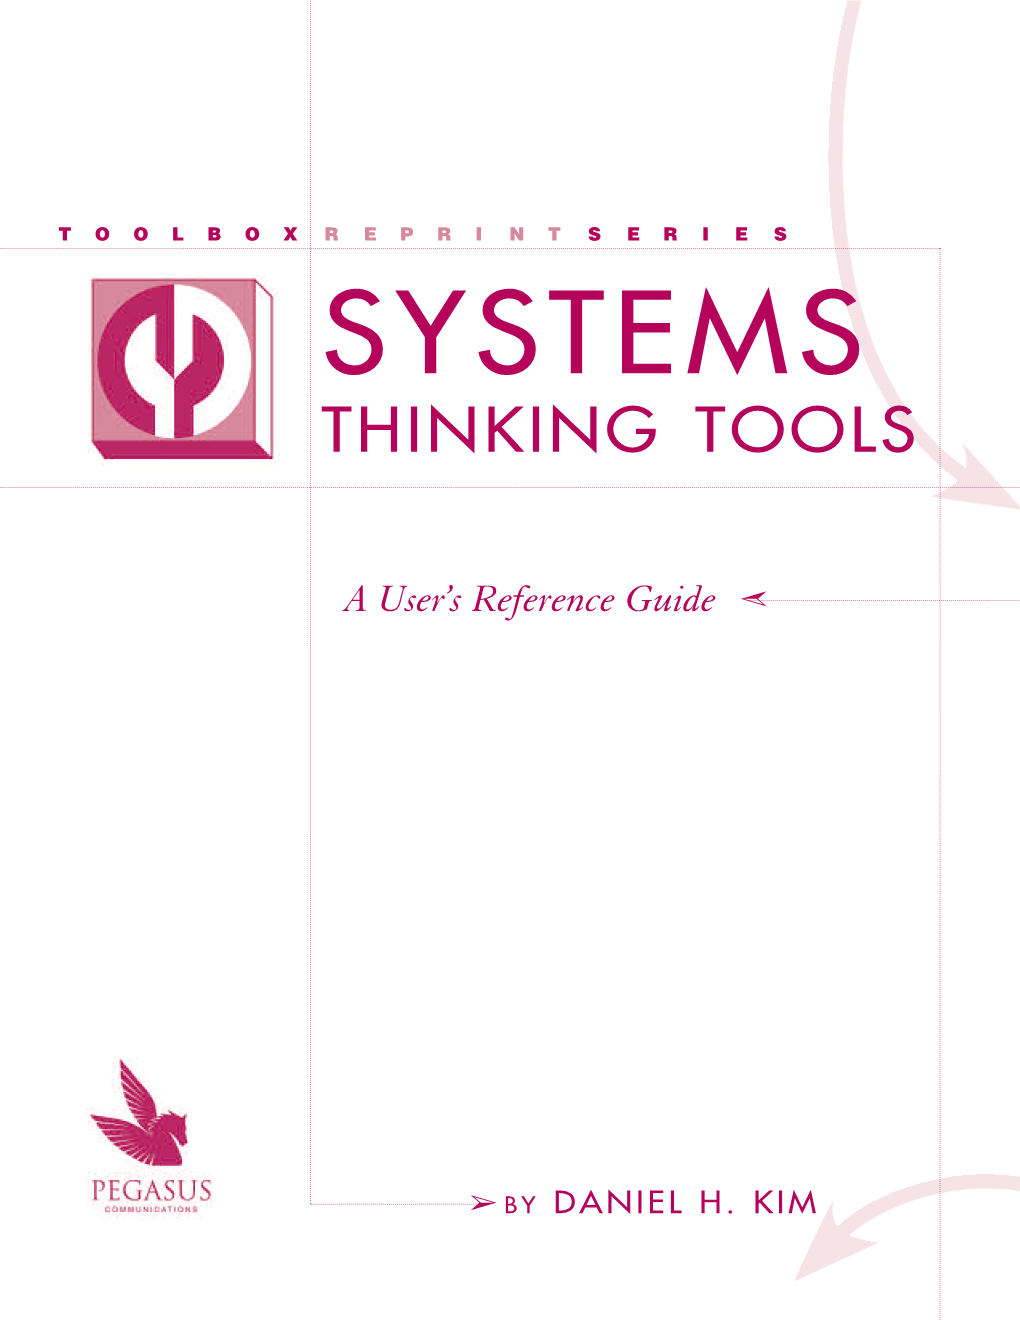 Systems Thinking Tools: a User's Reference Guide by Daniel H